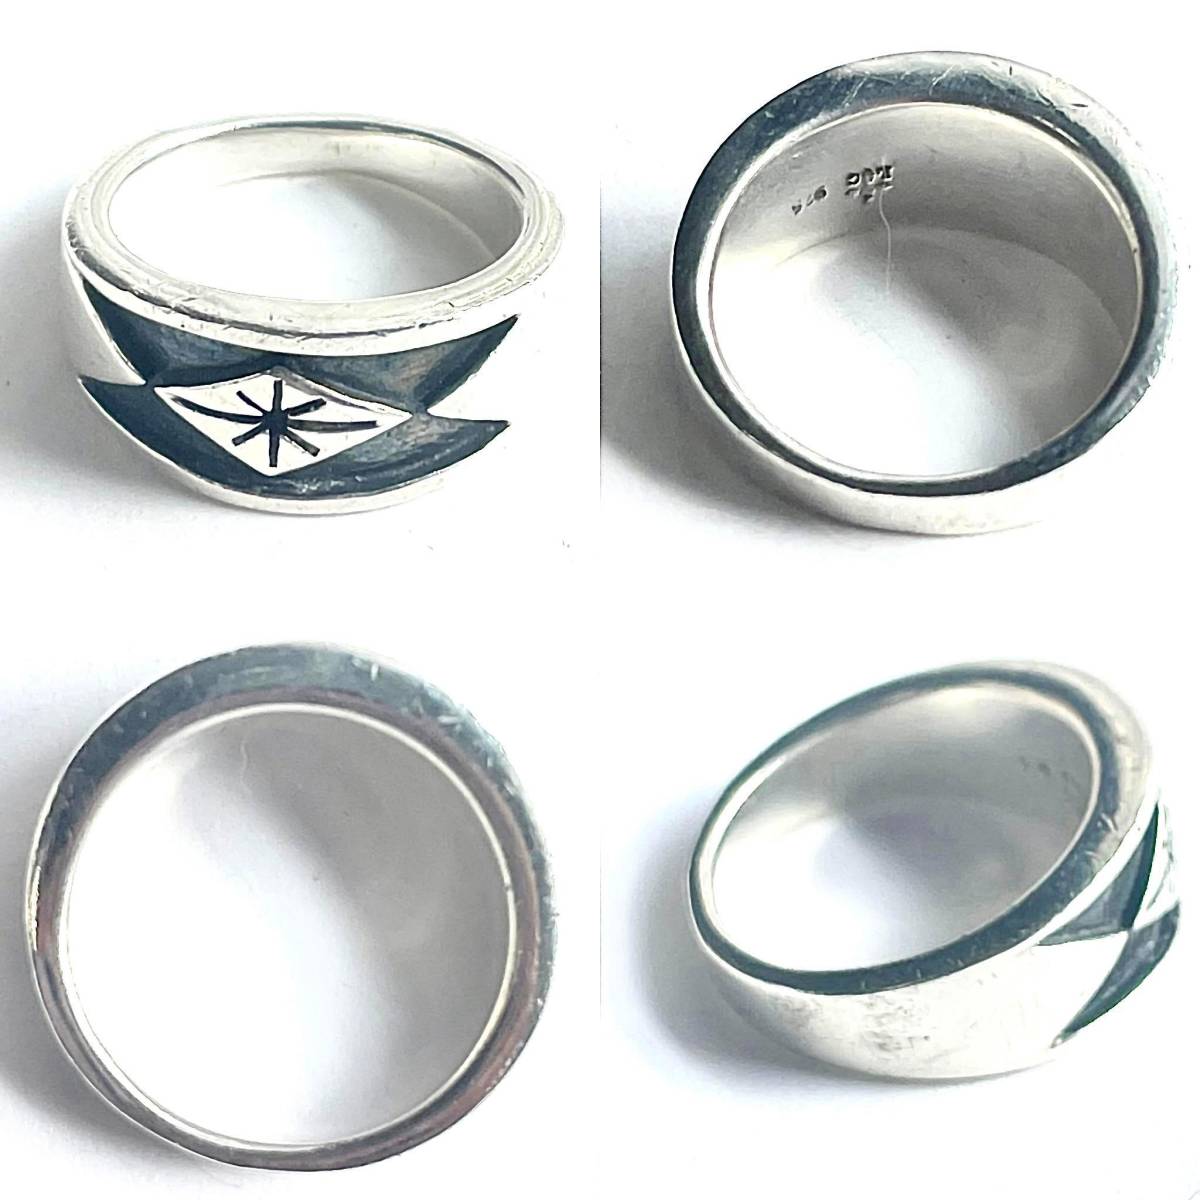 [ rare ]Lord Camelot design silver men's ring silver 925 Lord Camelot 21 number rom and rear (before and after) 11.5g